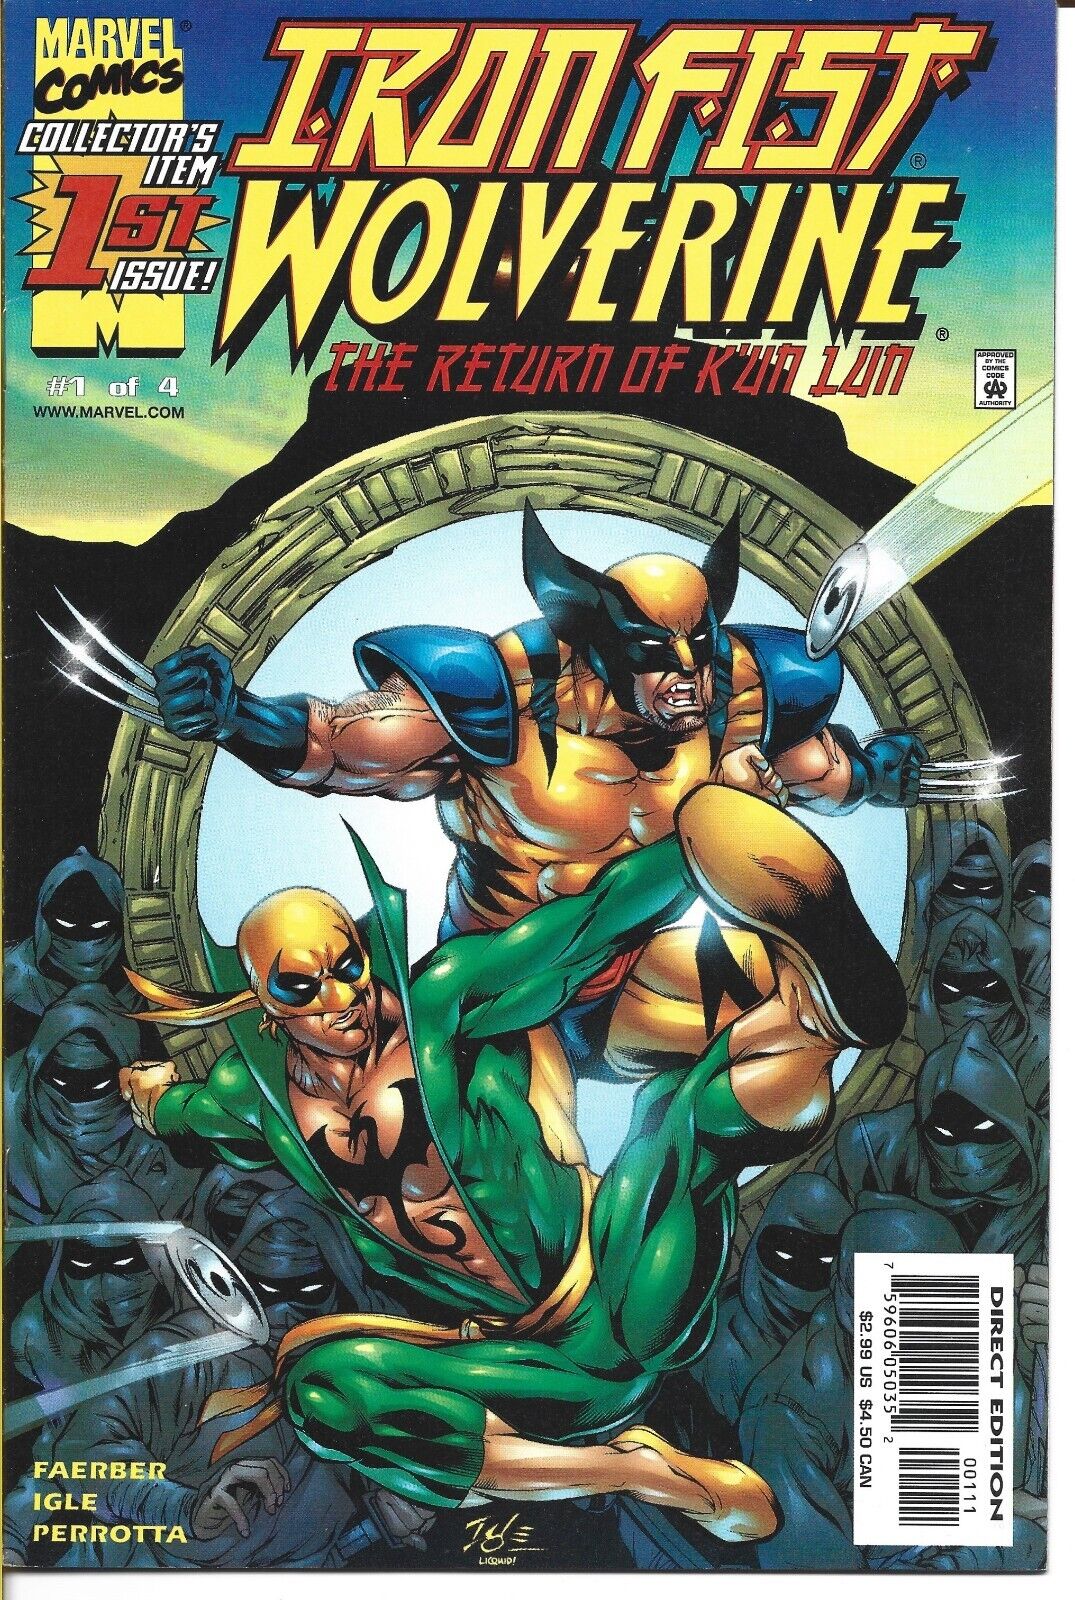 IRON FIST WOLVERINE #1 MARVEL COMICS 2000 BAGGED AND BOARDED